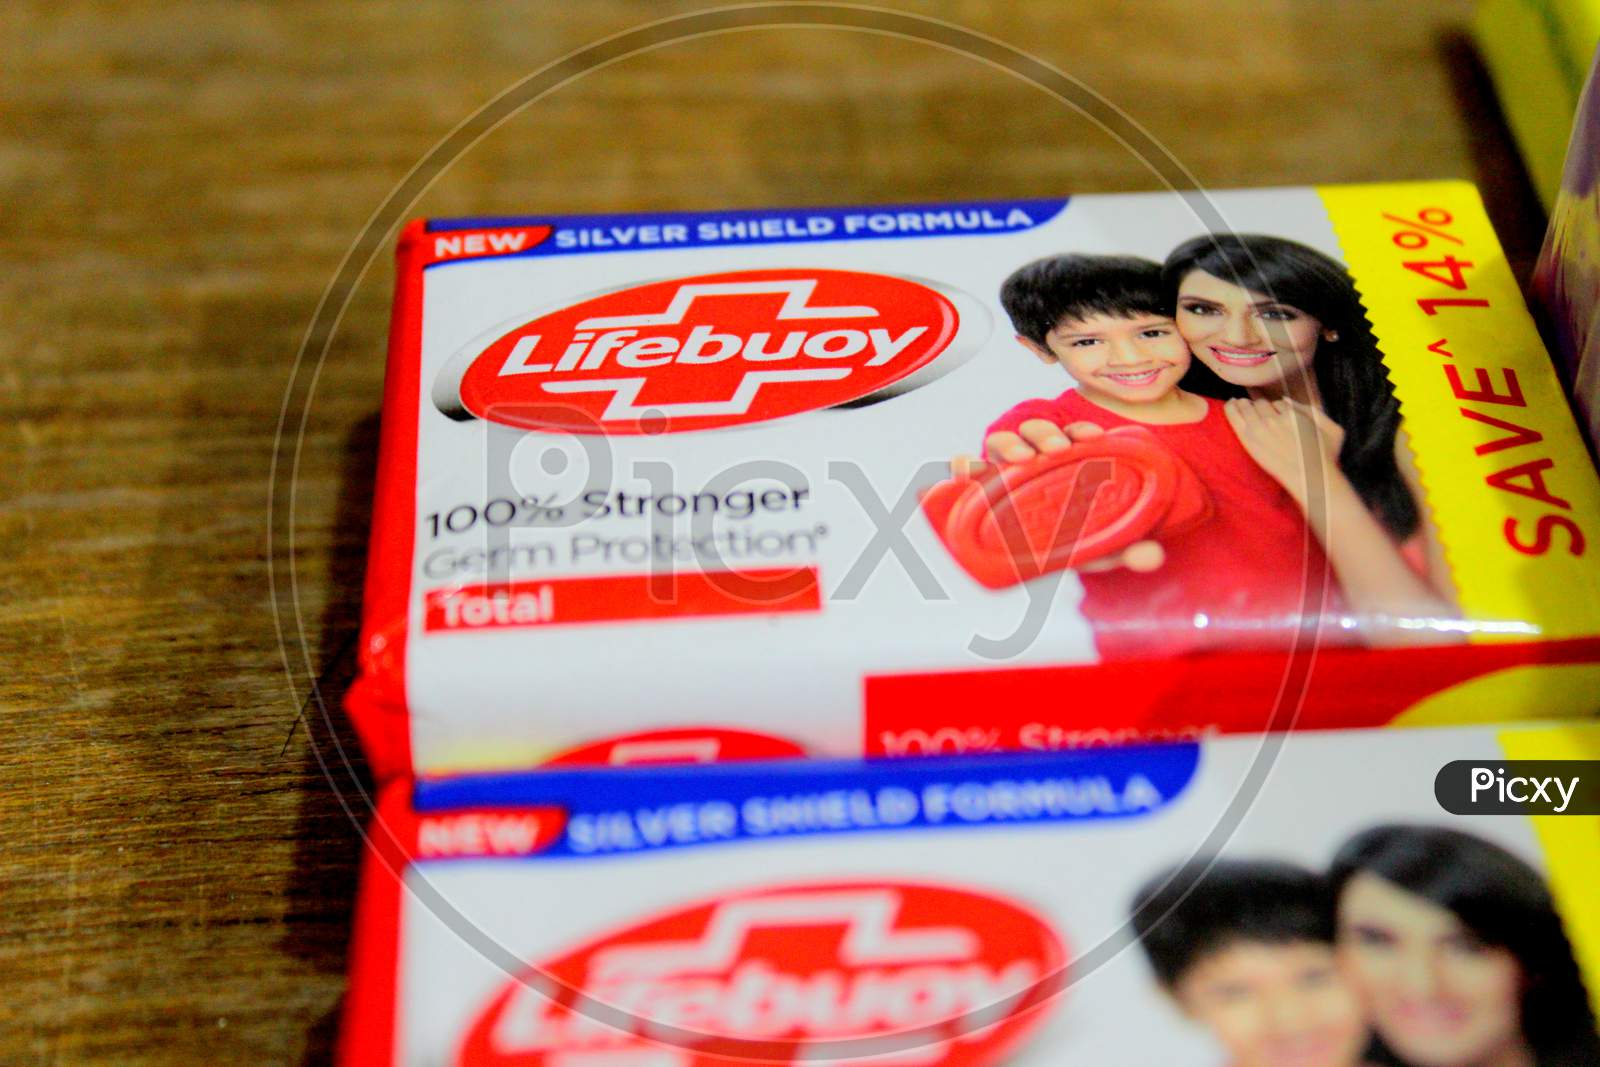 a view of lifebuoy soap